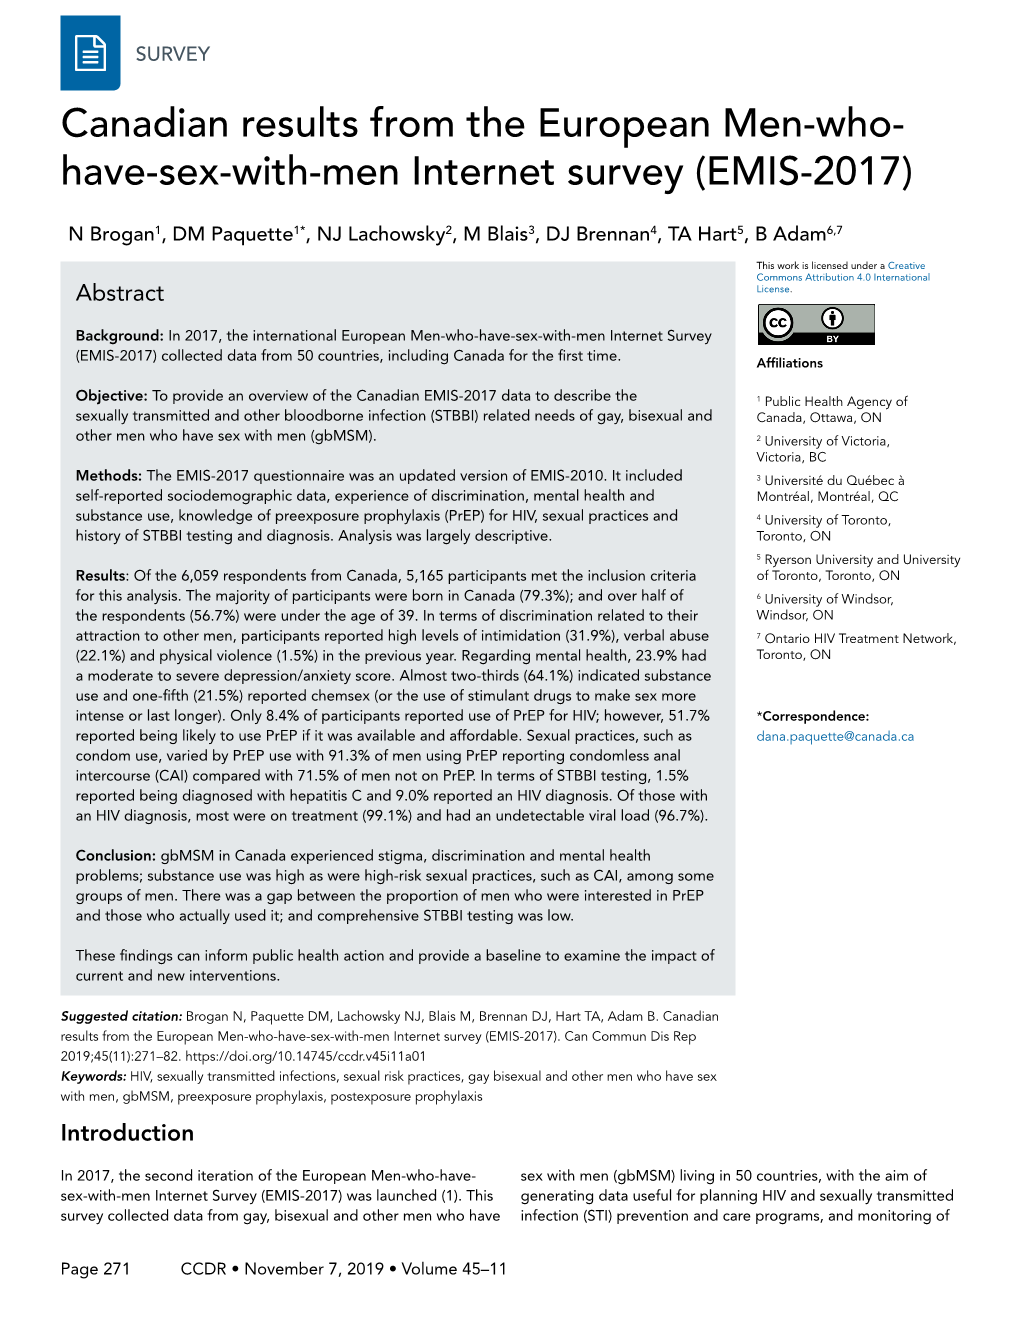 Canadian Results from the European Men-Who- Have-Sex-With-Men Internet Survey (EMIS-2017)